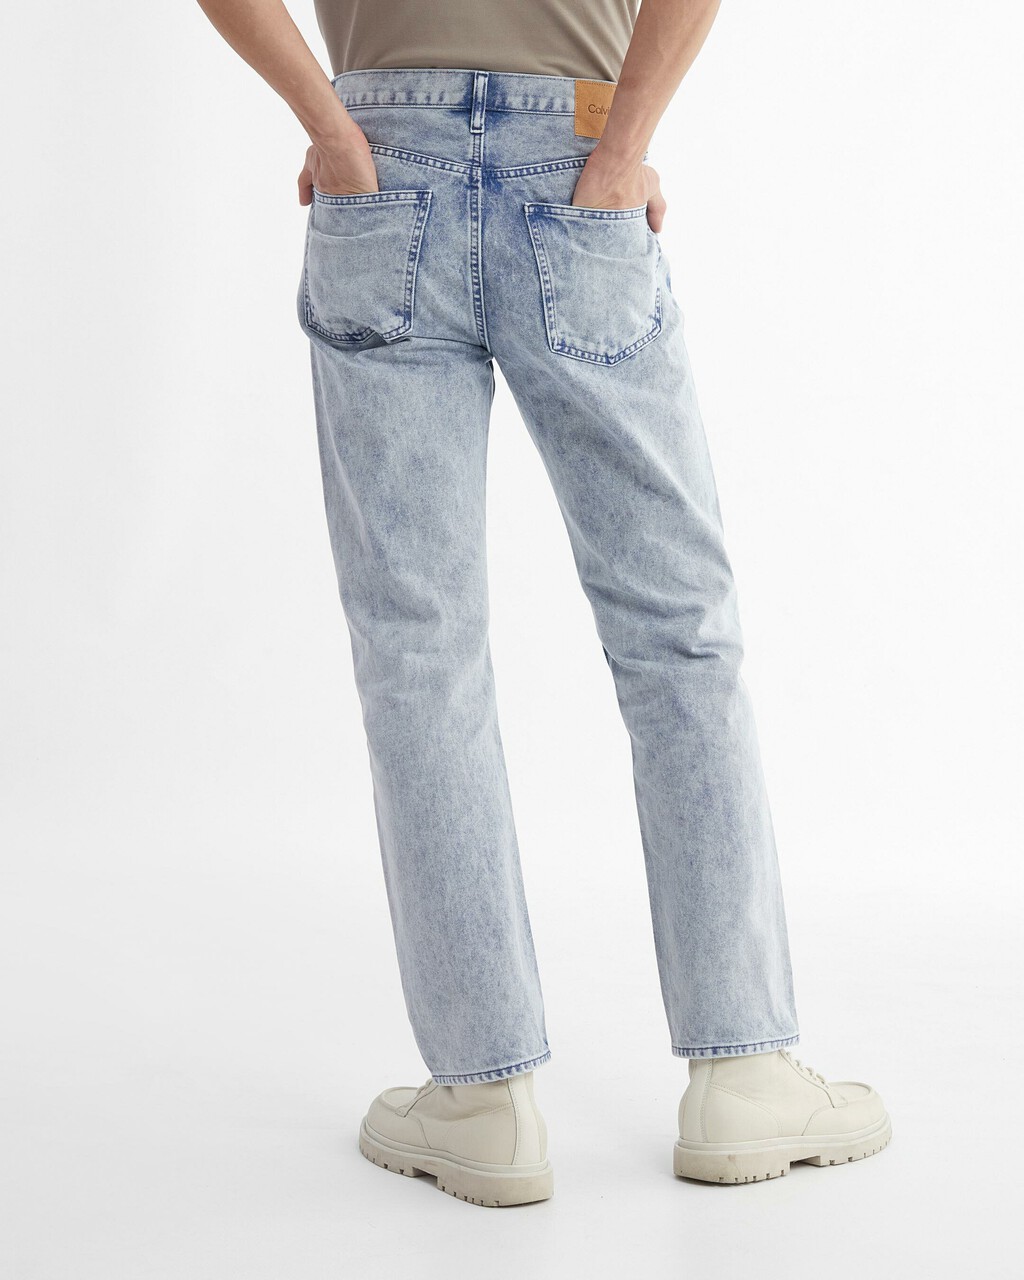 STANDARD STRAIGHT MINERAL WASH JEANS, BLUE HERALD MOON WASH, hi-res